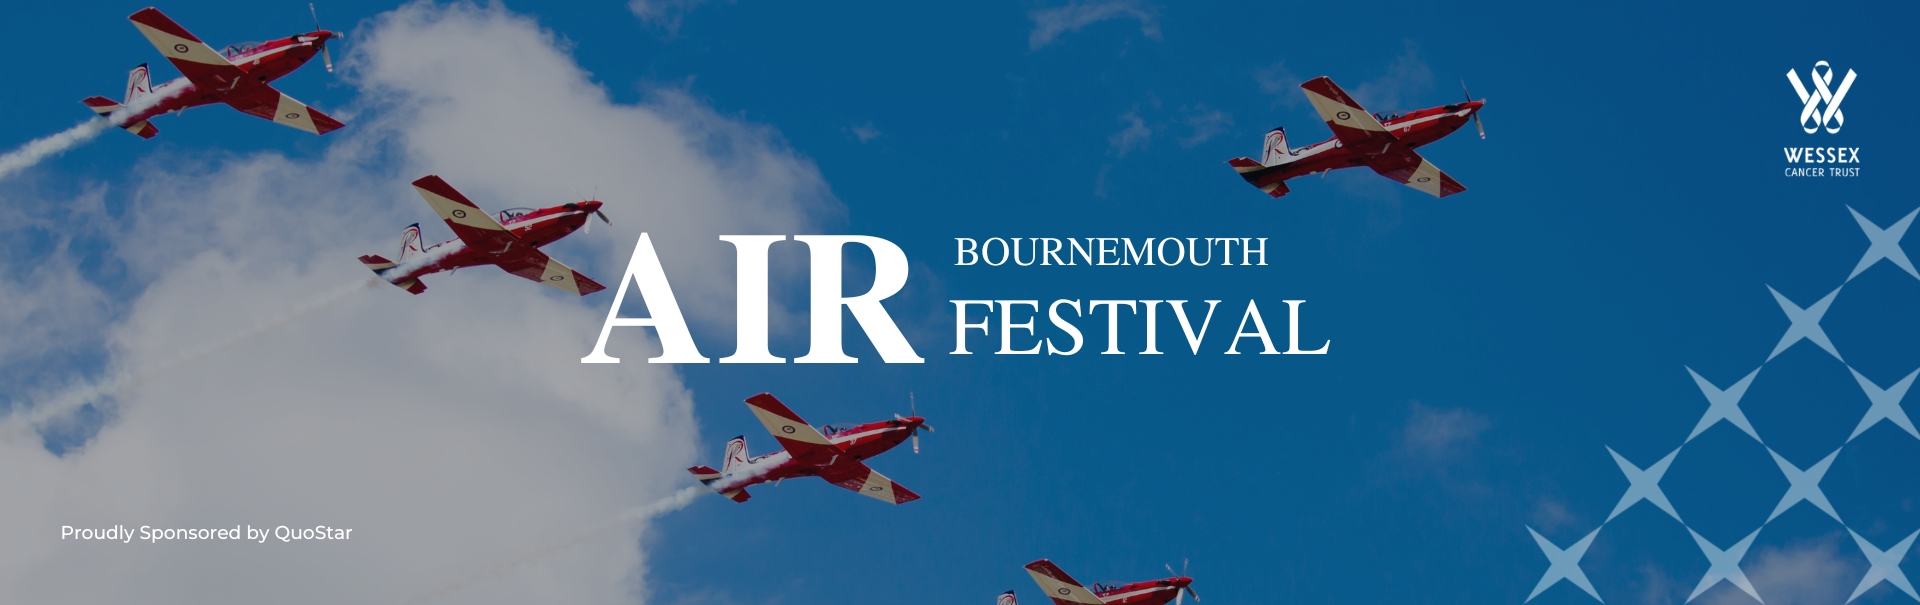 Corporate Hospitality Day at Bournemouth Air Festival